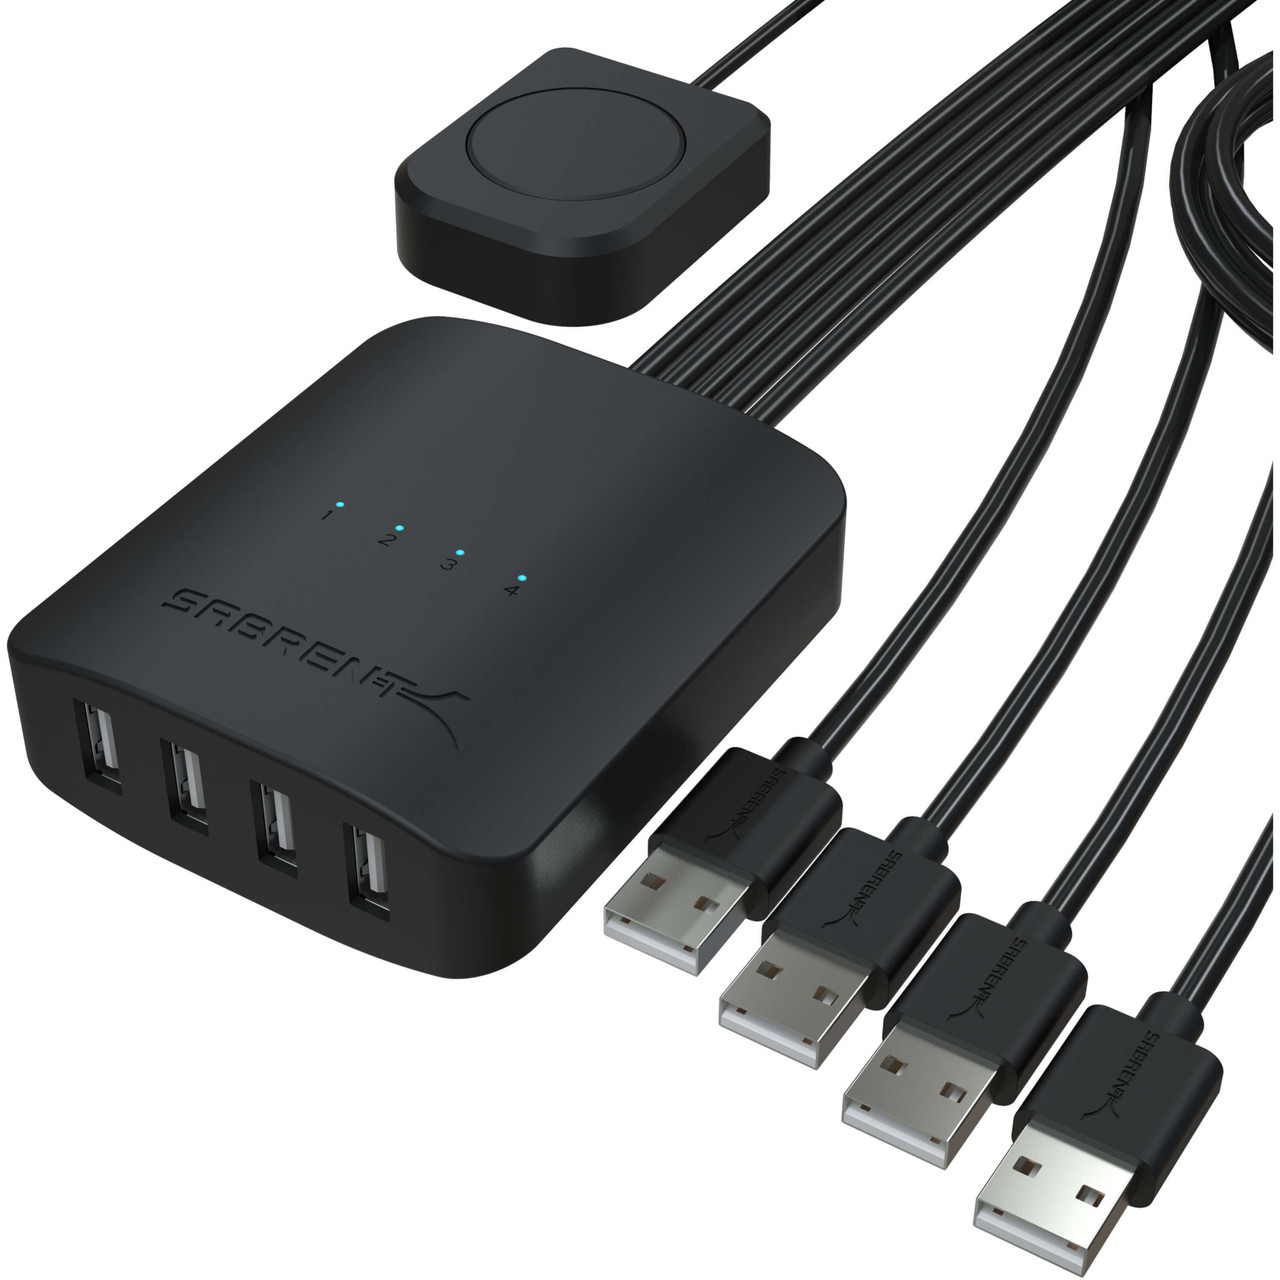 Sabrent USB 2.0 Sharing Switch Up To 4 Computers and Peripherals (USB-USS4) - USB-USS4